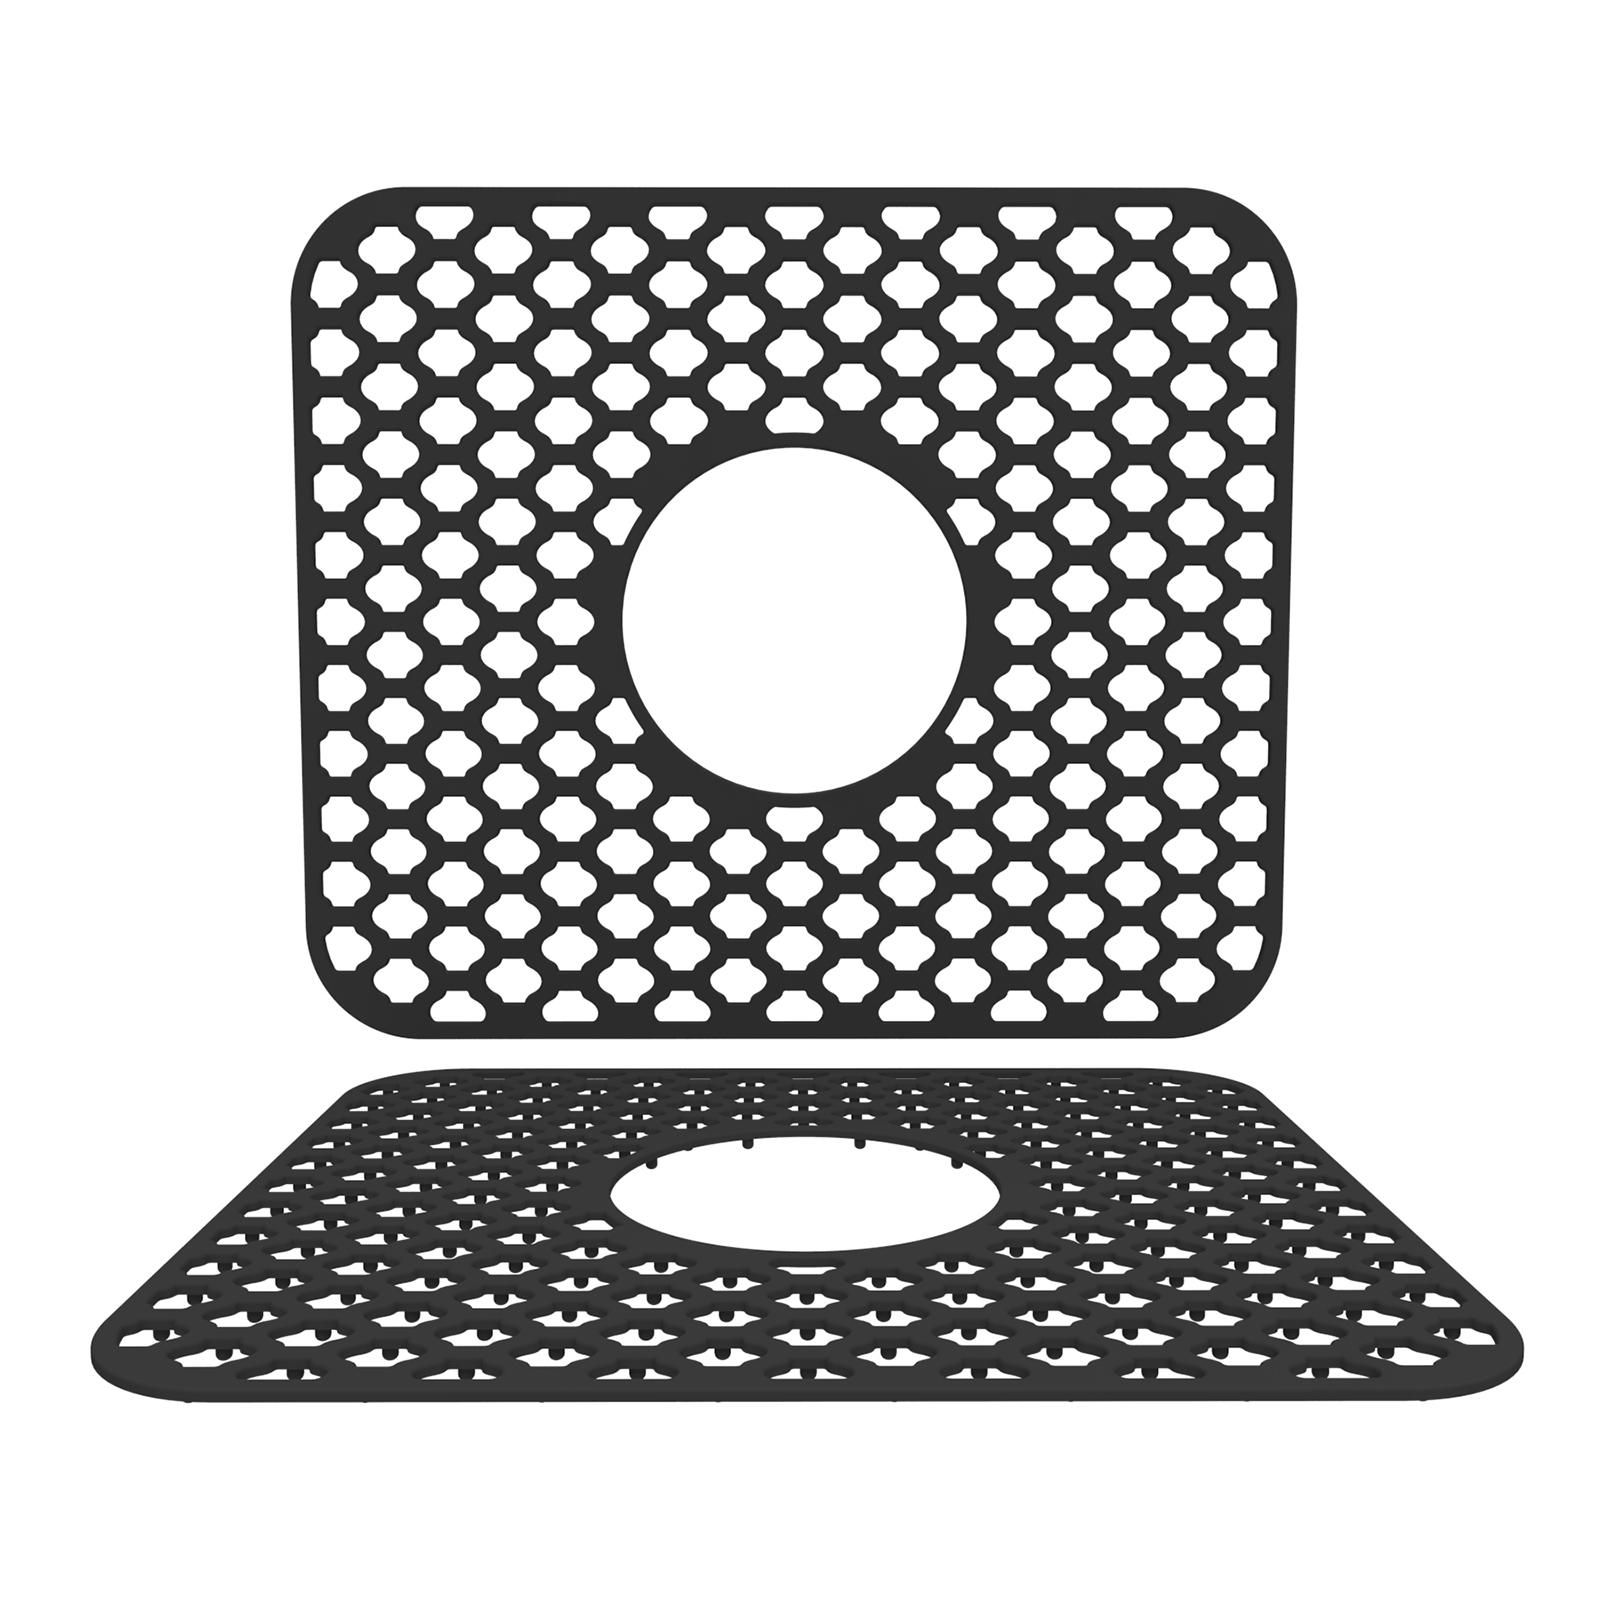 Draining Board Mats,43 x 32 cm Silicone Dish Drying Mat,Non-Slip Sink  Drainer Mat,Kitchen Countertop Heat Resistant Pad,Collapsible Silicone  Draining